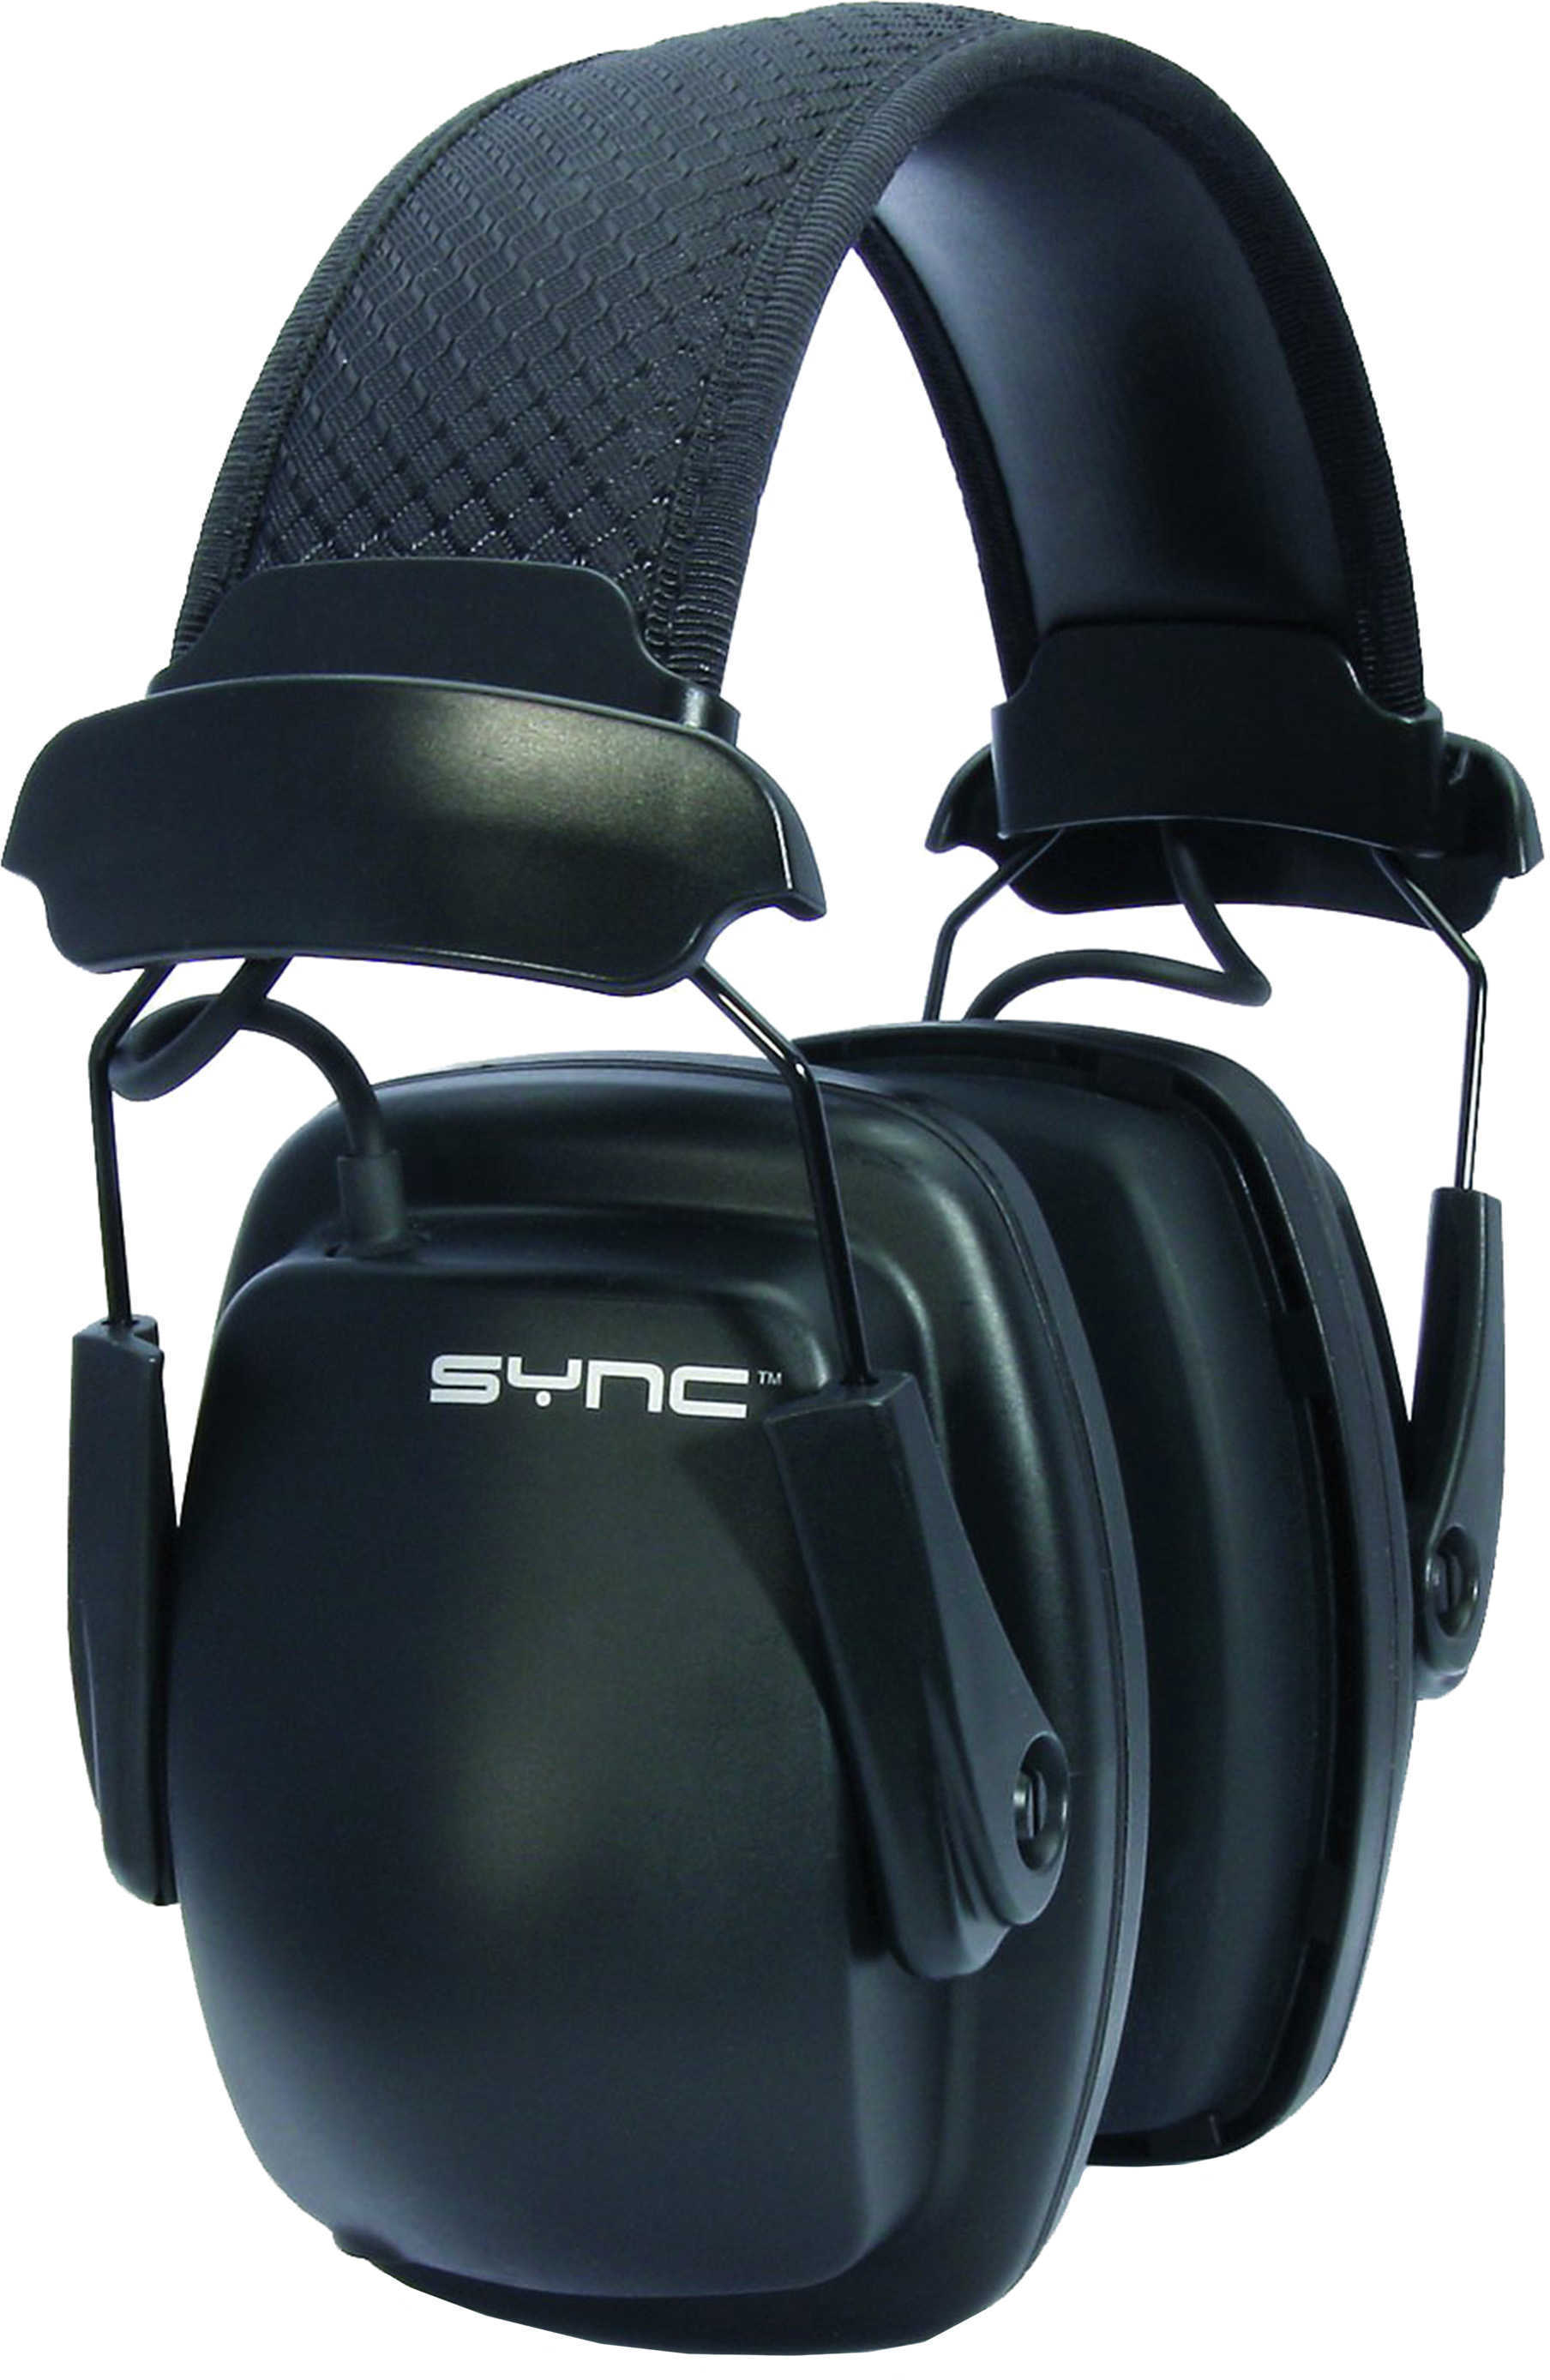 Howard Leight Industries SYNC Earmuff Black NRR 25 3.5mm Audio Connection Cord 1030110